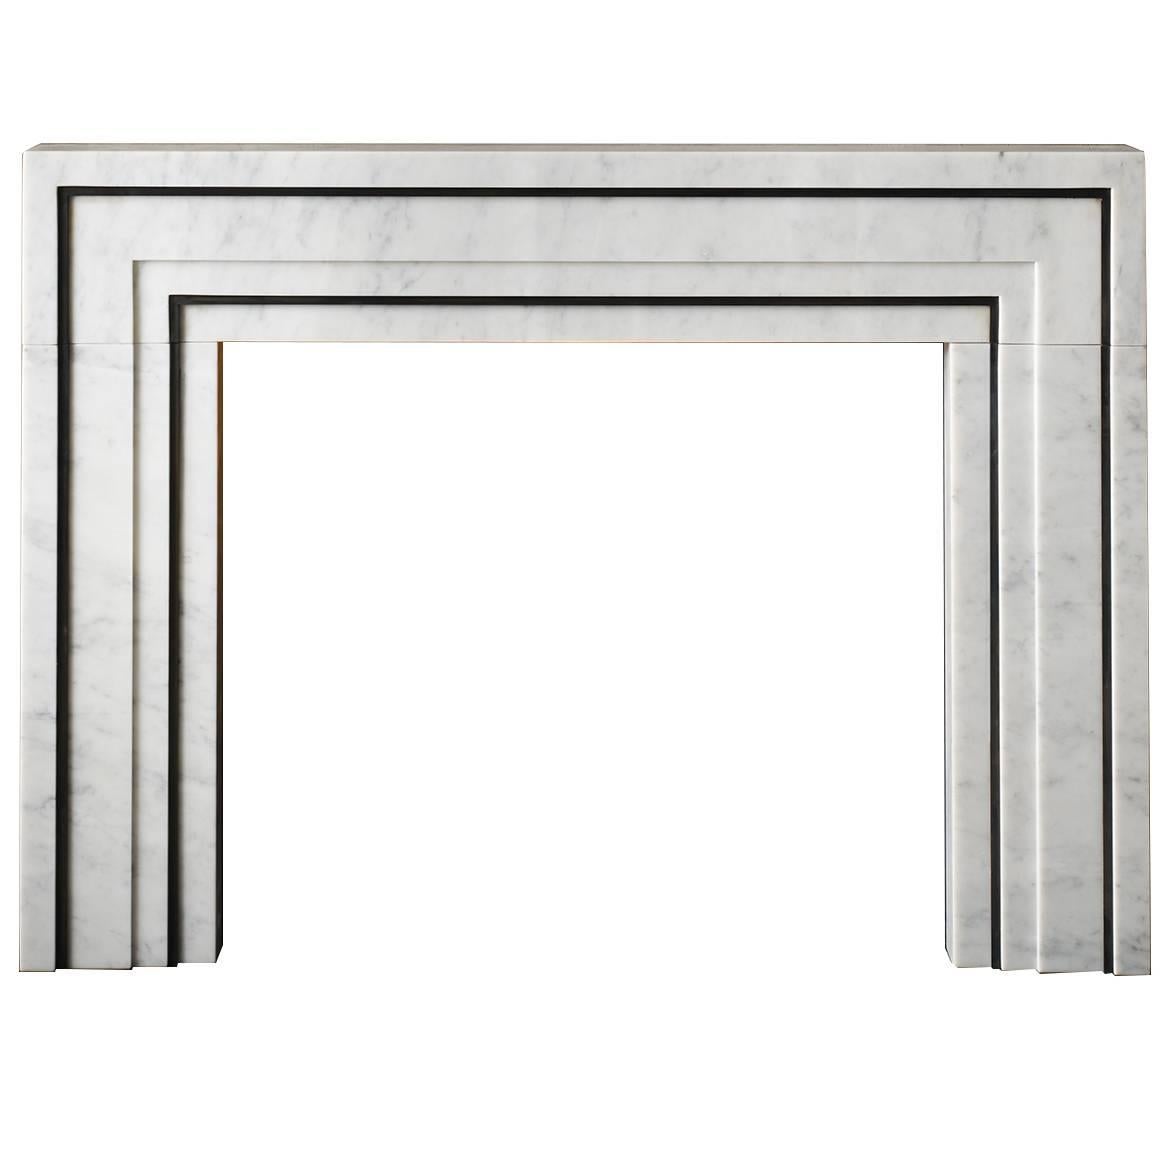 21st Century Marble and Steel Mantel Designed by Eric Cohler